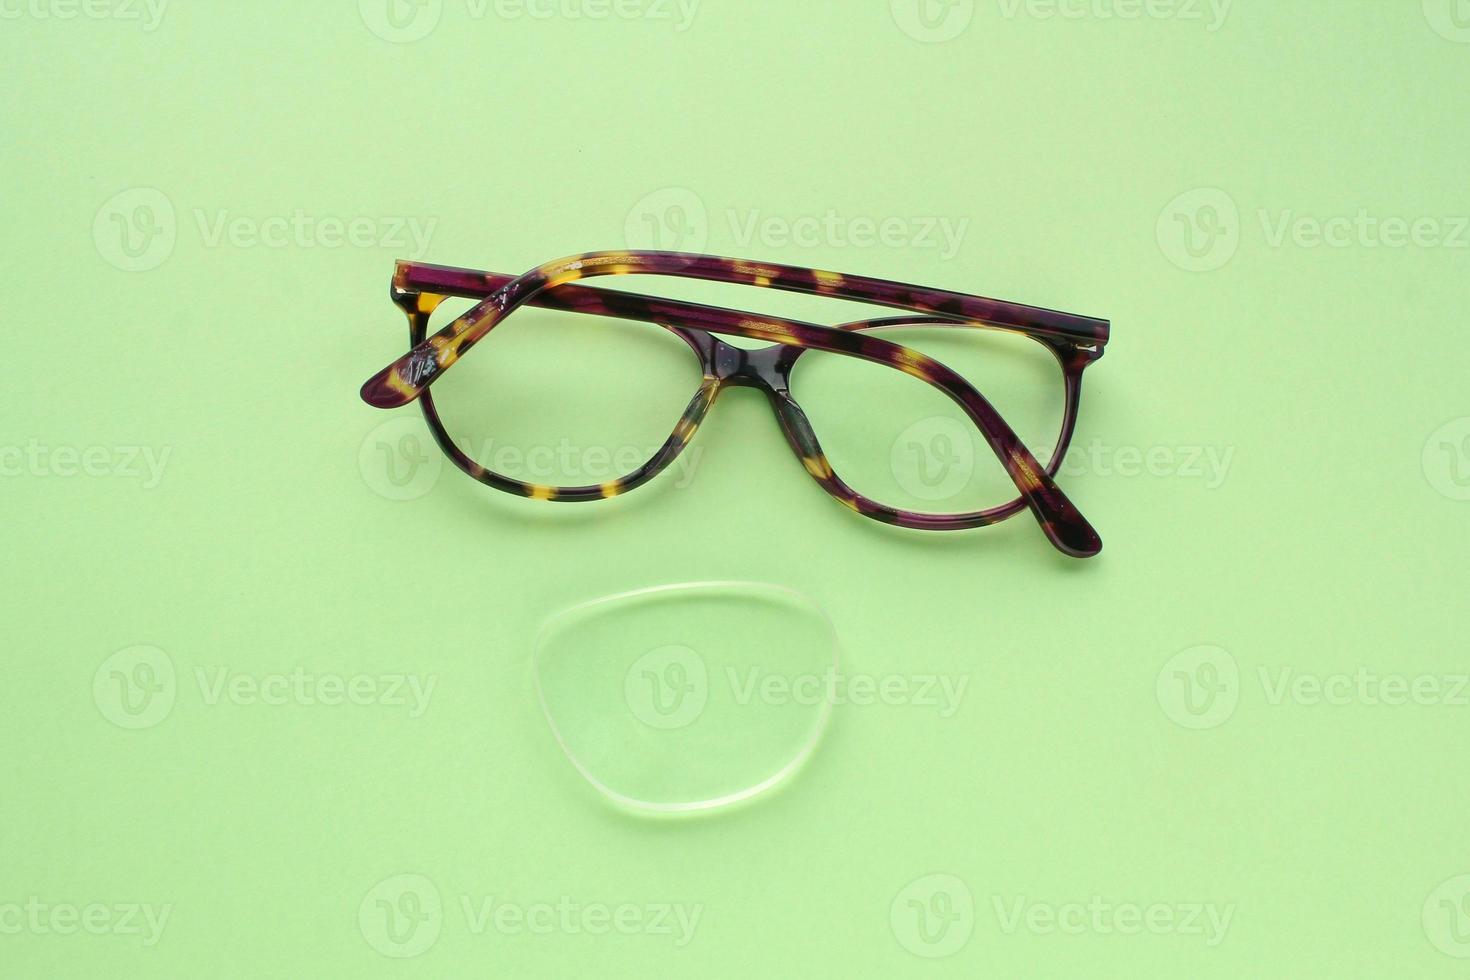 Old broken eyeglasses with damaged lens on green background. Poor eyesight. Reuse and repair concept. Idea of health. Failure optic eyewear. Breakage of vision correction glasses. Close up, flat lay photo